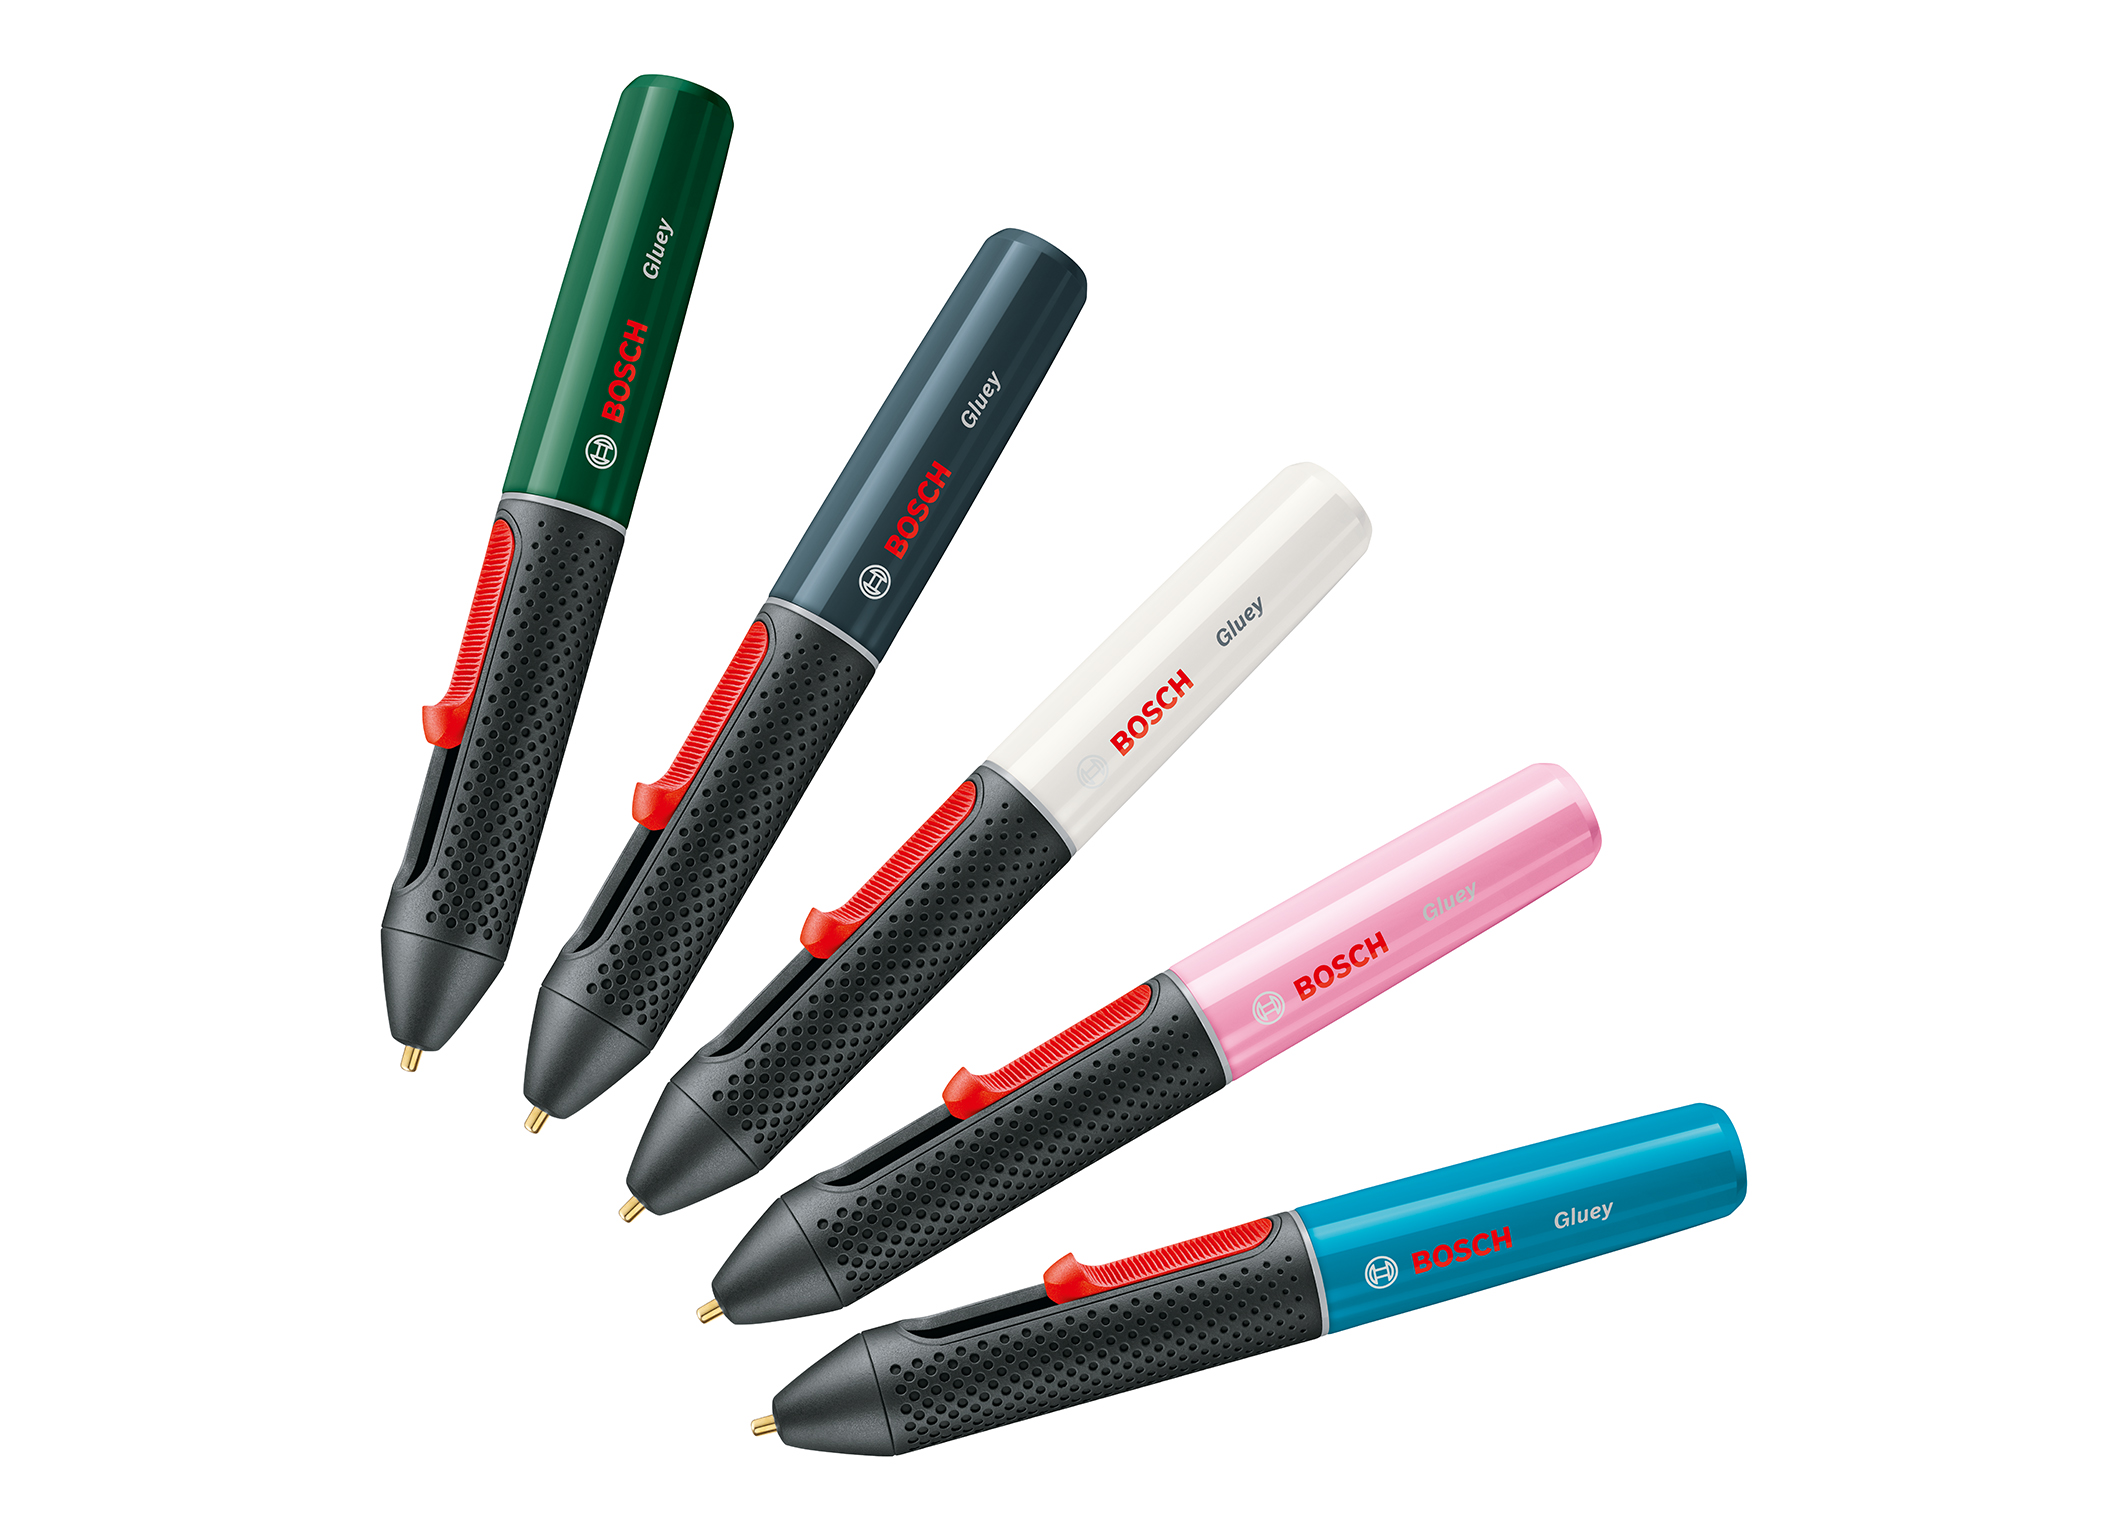 Five shiny models in different colors: the Gluey hot glue pen from Bosch